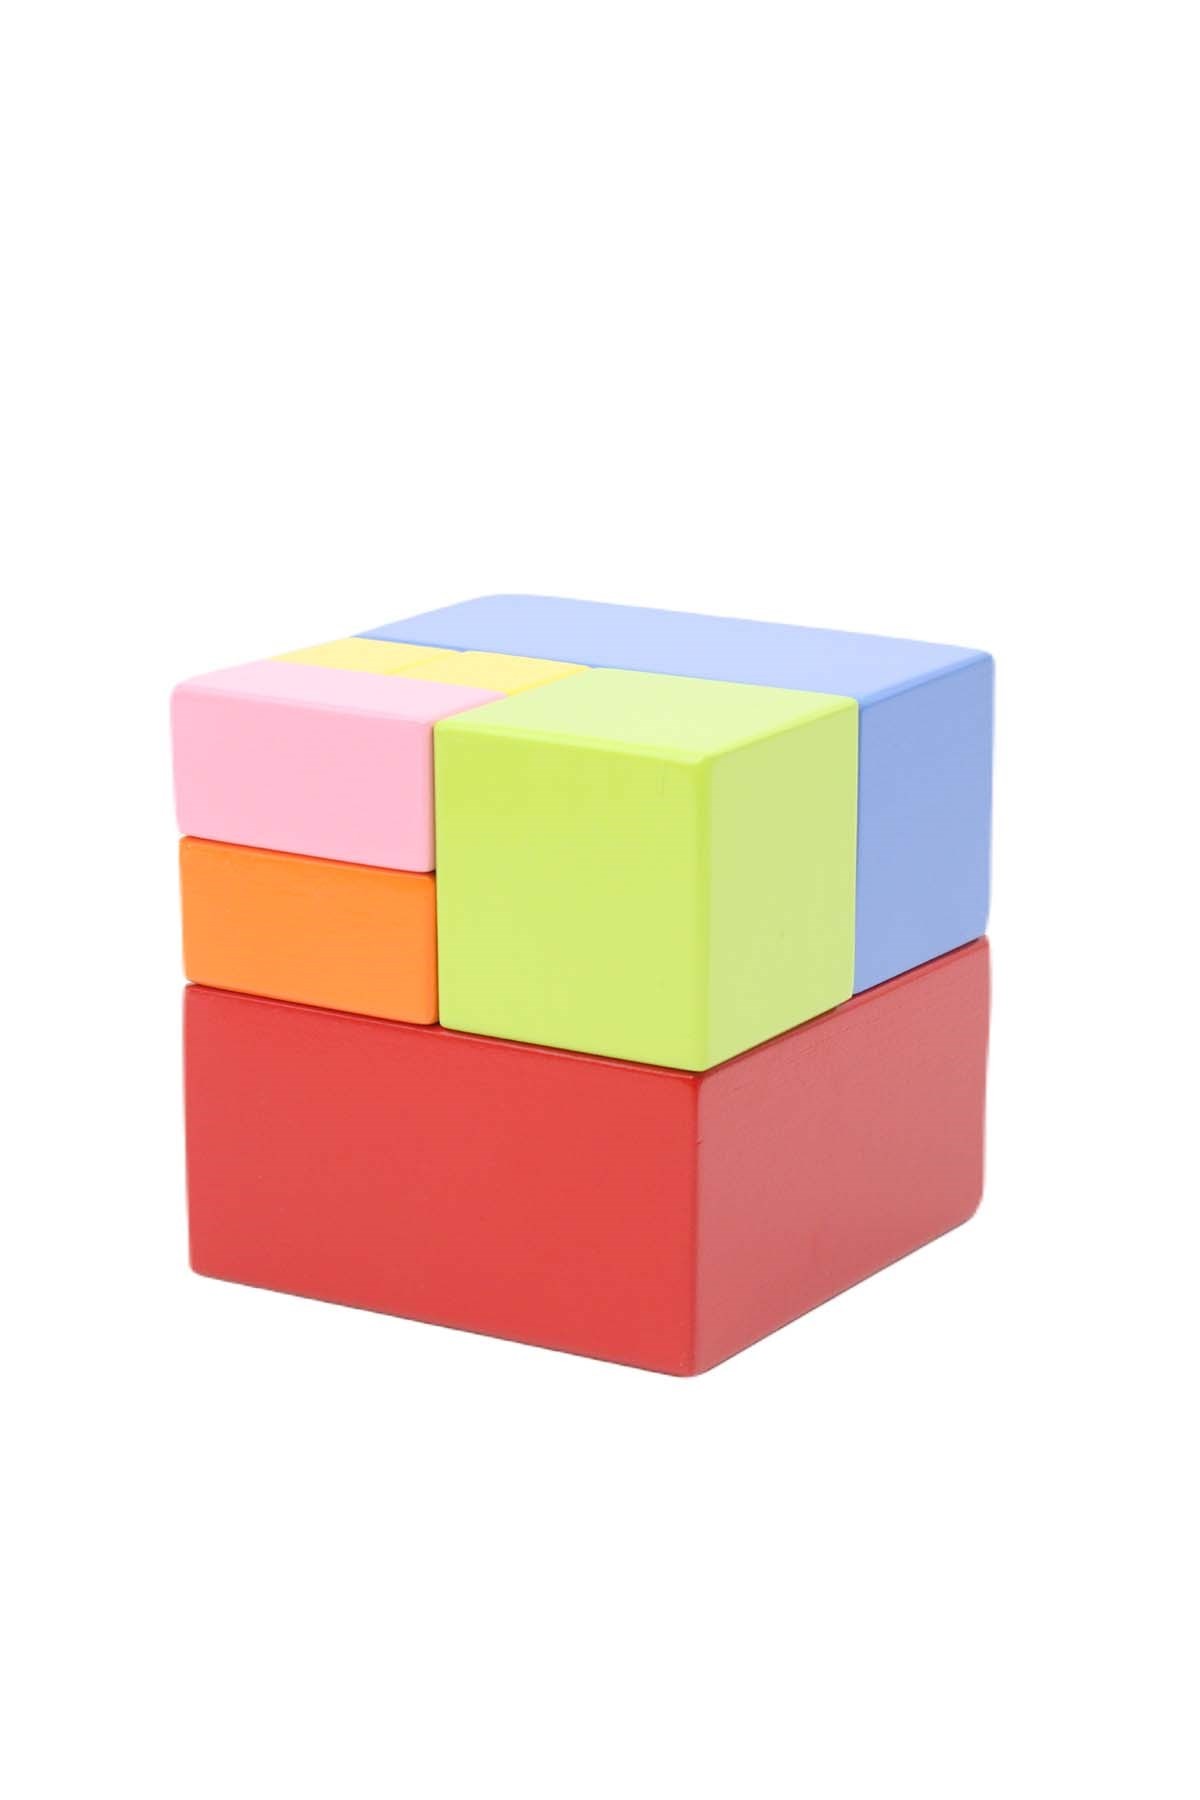 Piece and Whole Educational Cube | Shape Color and Size Learning | WoodNotion Işık